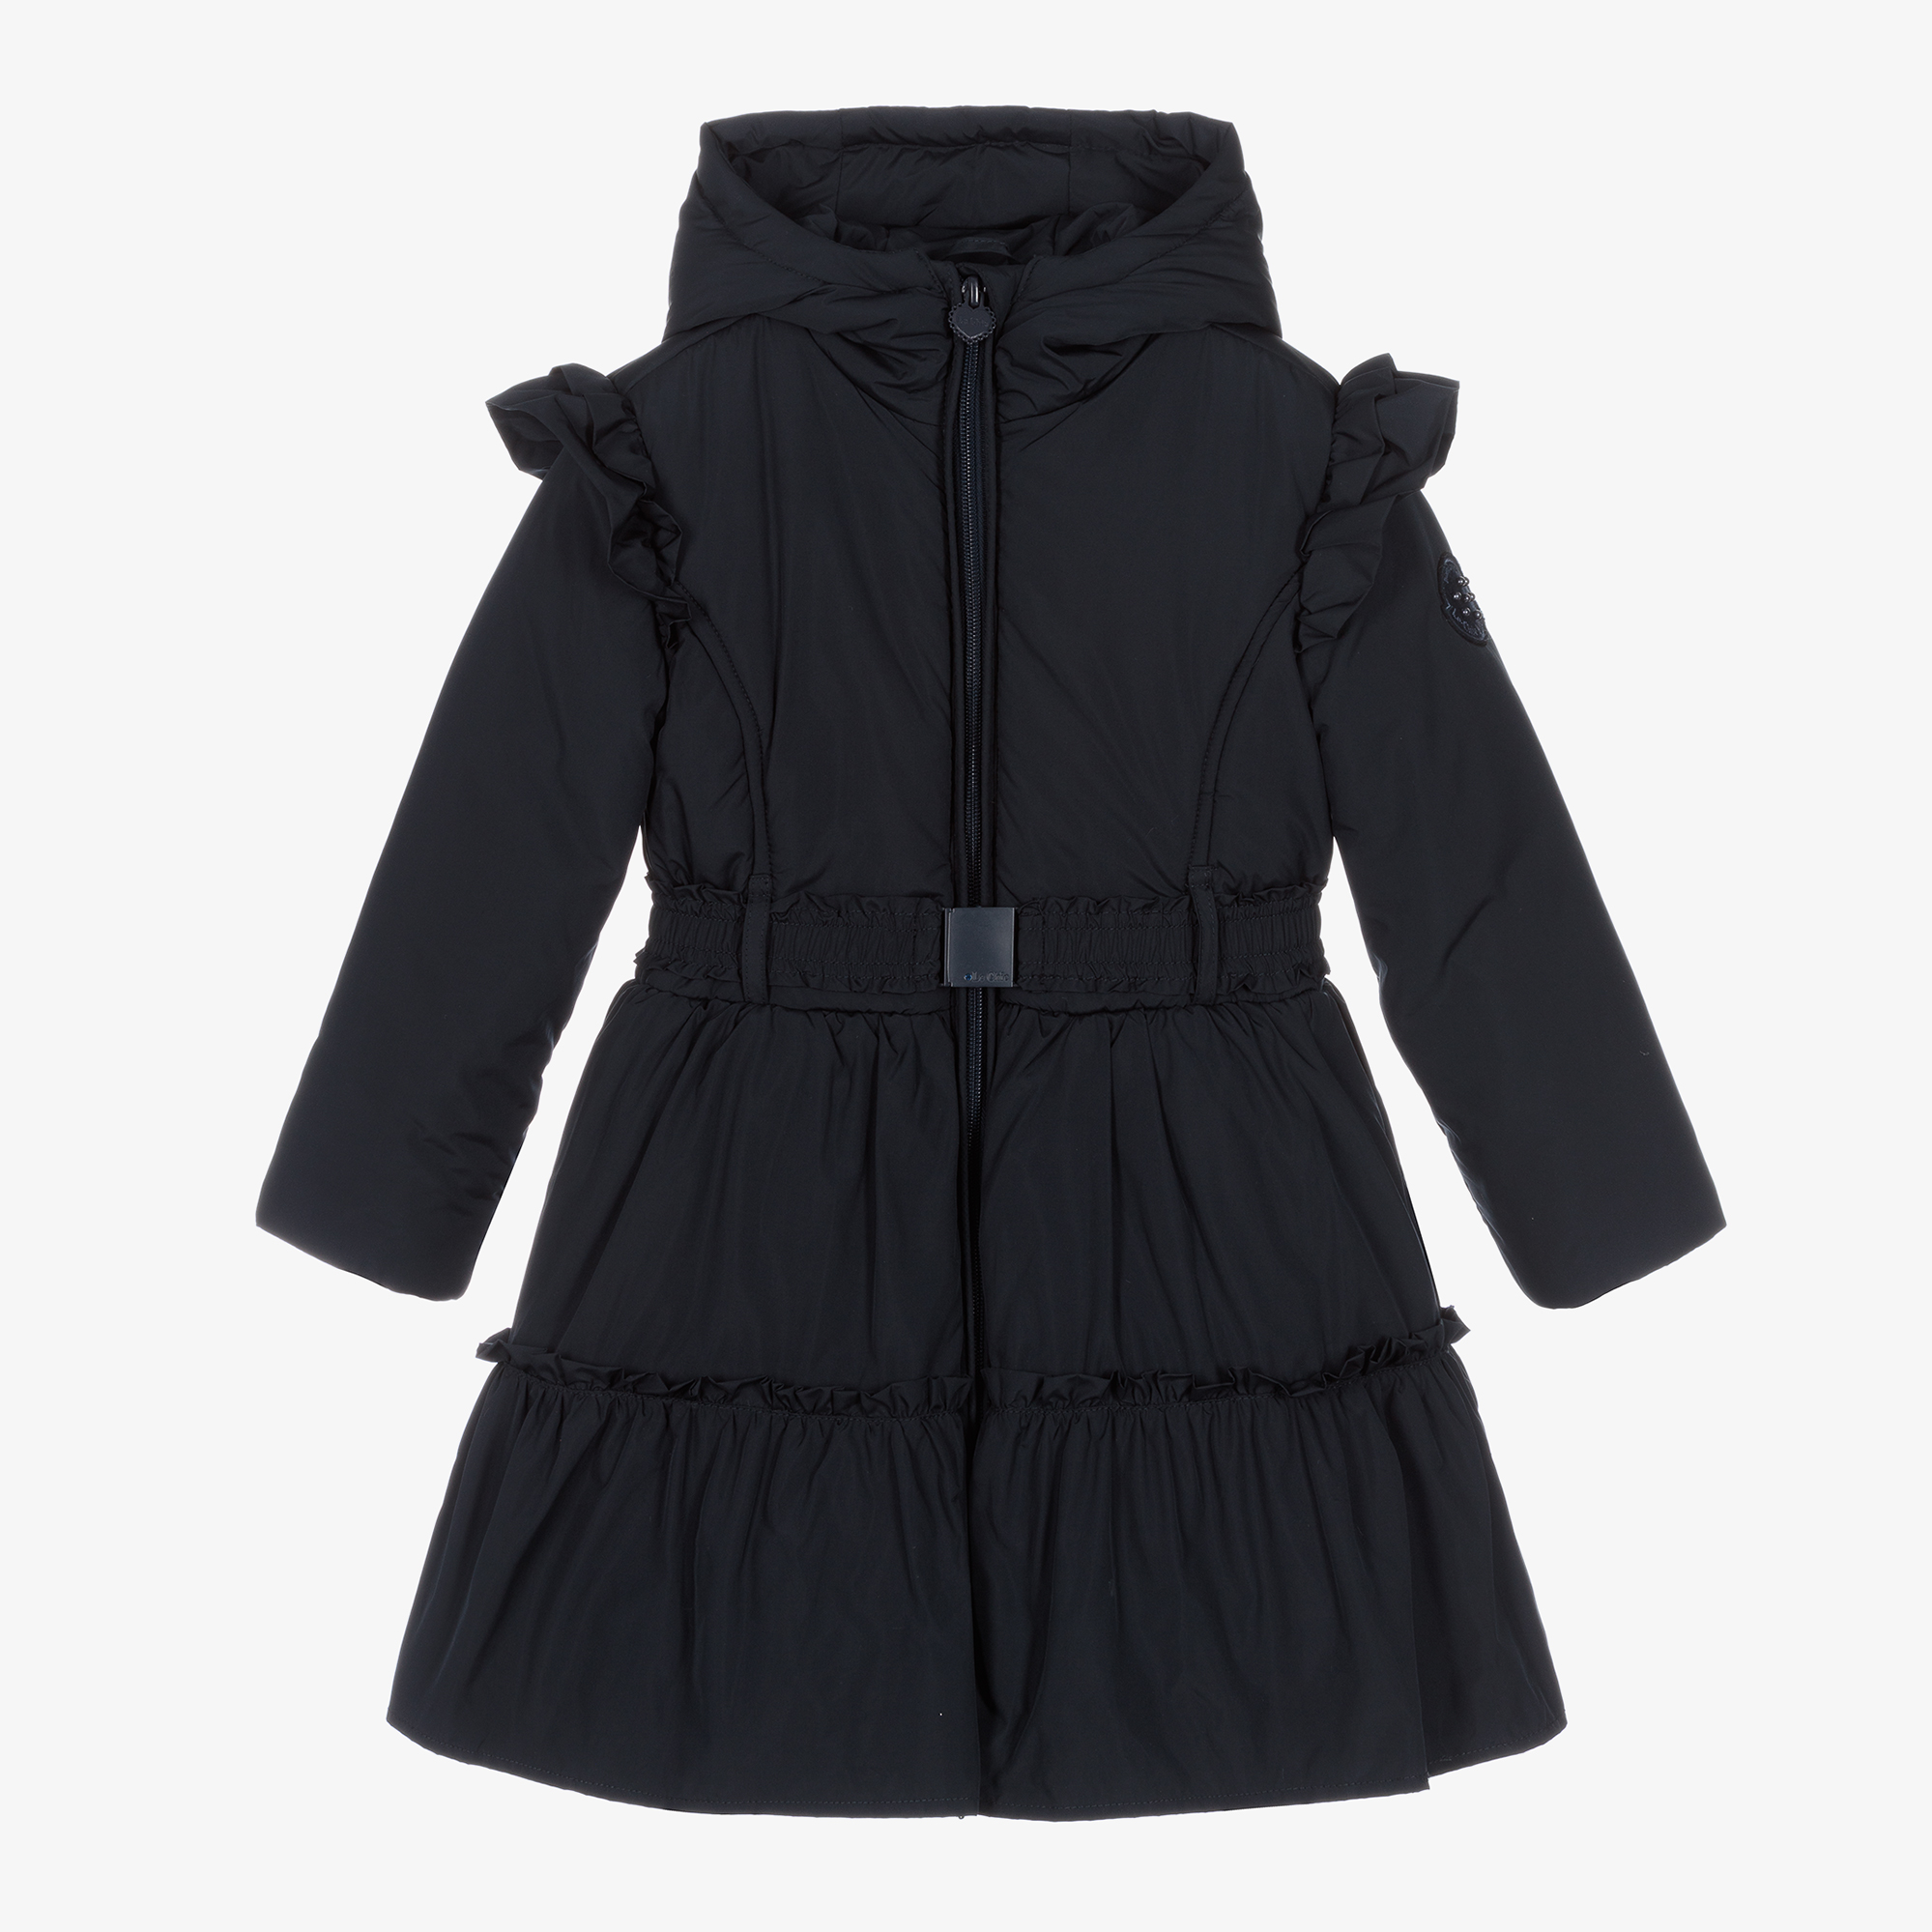 Le Chic - Girls Brown Hooded Puffer Coat | Childrensalon